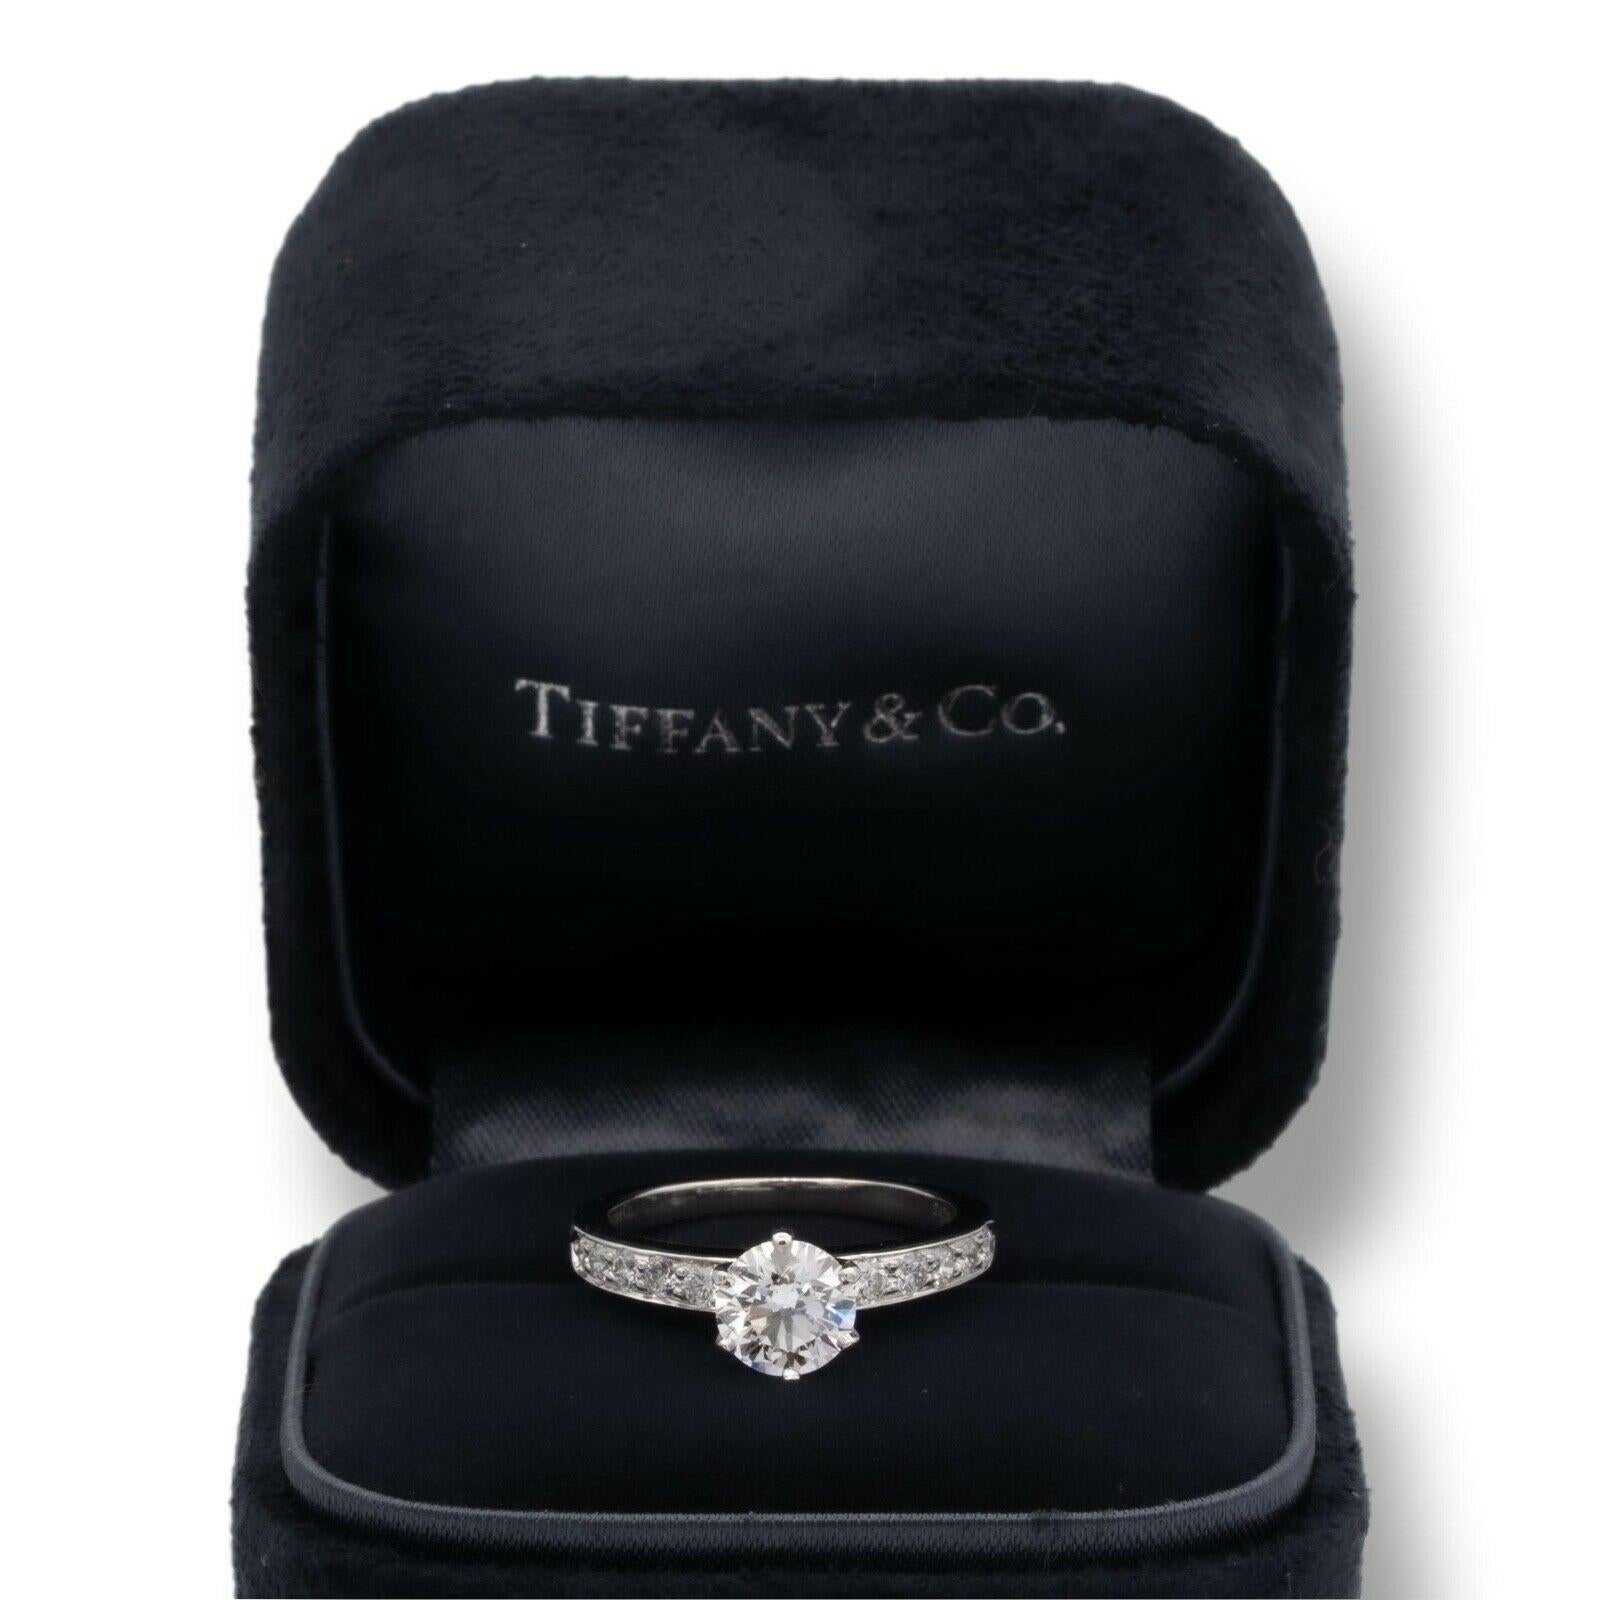 Tiffany & Co. Diamond Engagement ring with channel set diamond band featuring a 0.87 ct center H VVS2 in Platinum. Center diamond is flanked by 5 channel set round brilliant cut diamonds on each side set in prongs inside the channel band for a total